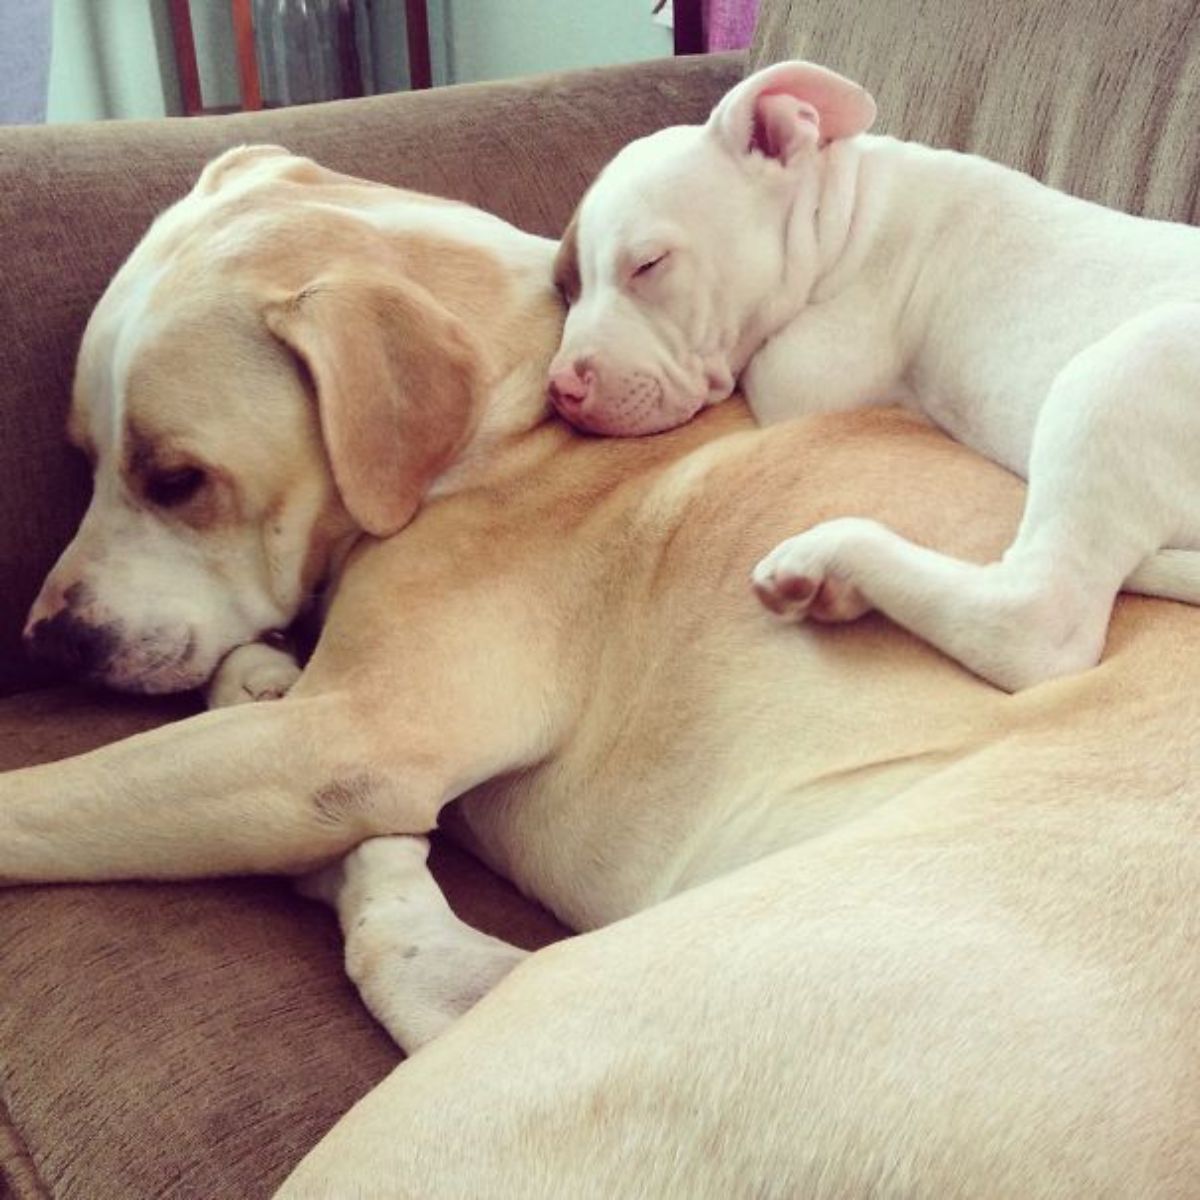 a white puppy sleeping on a light brown and white dog on a couch